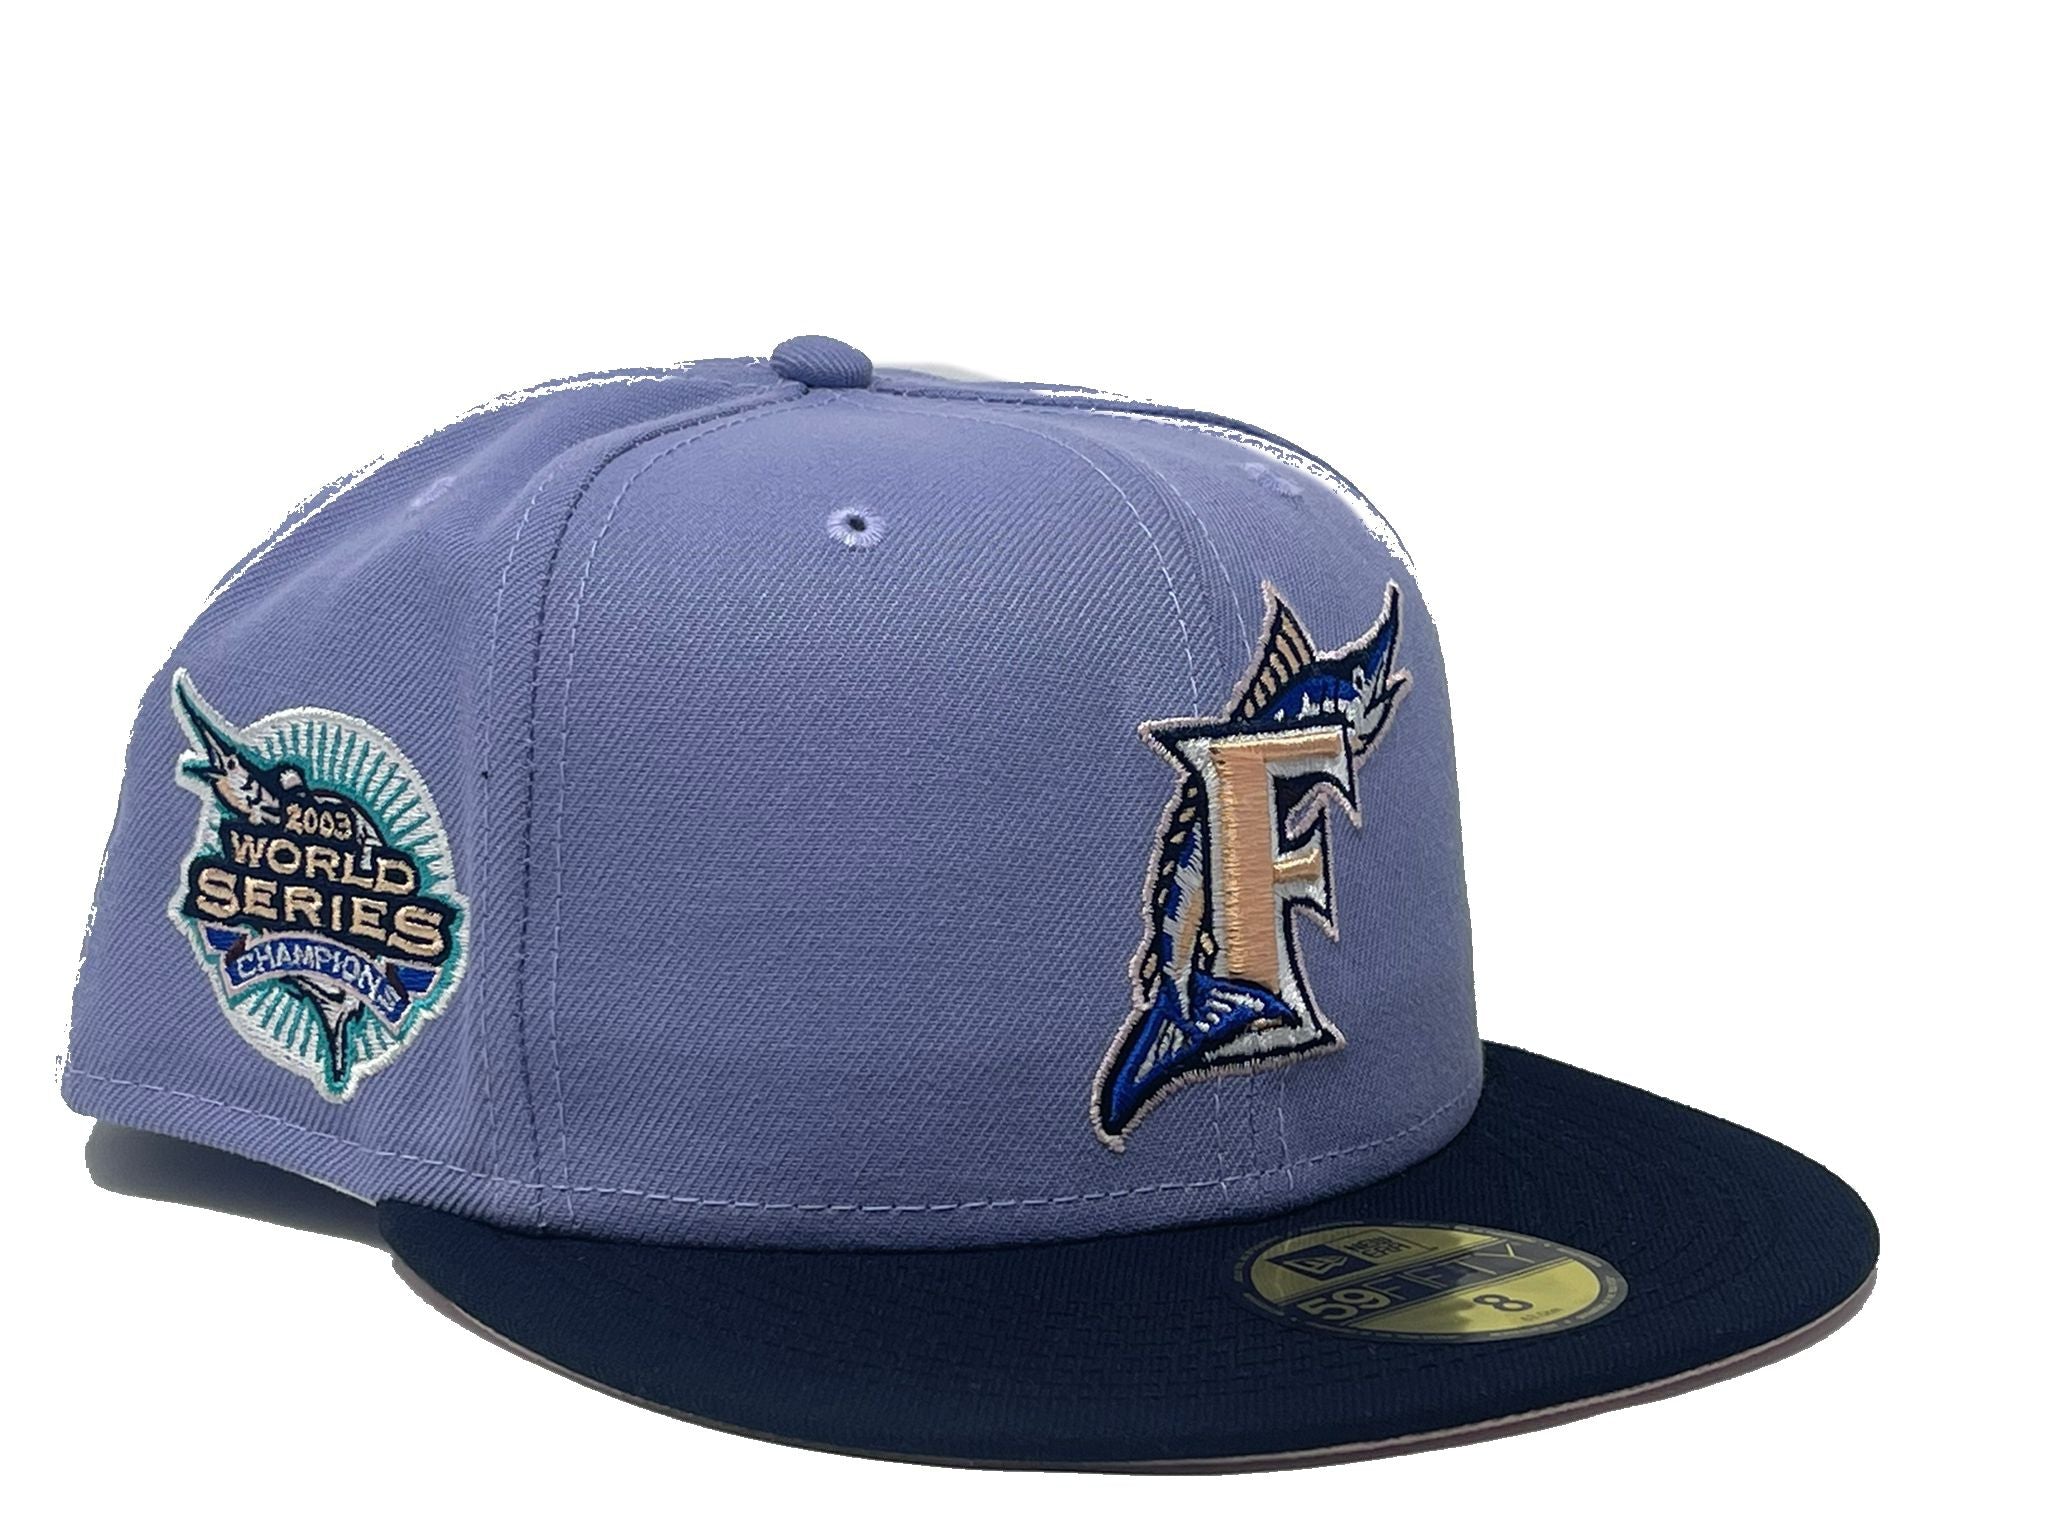 New Era Miami Marlins World Series 2003 Champions Coffee Pink Edition  59Fifty Fitted Cap, EXCLUSIVE HATS, CAPS